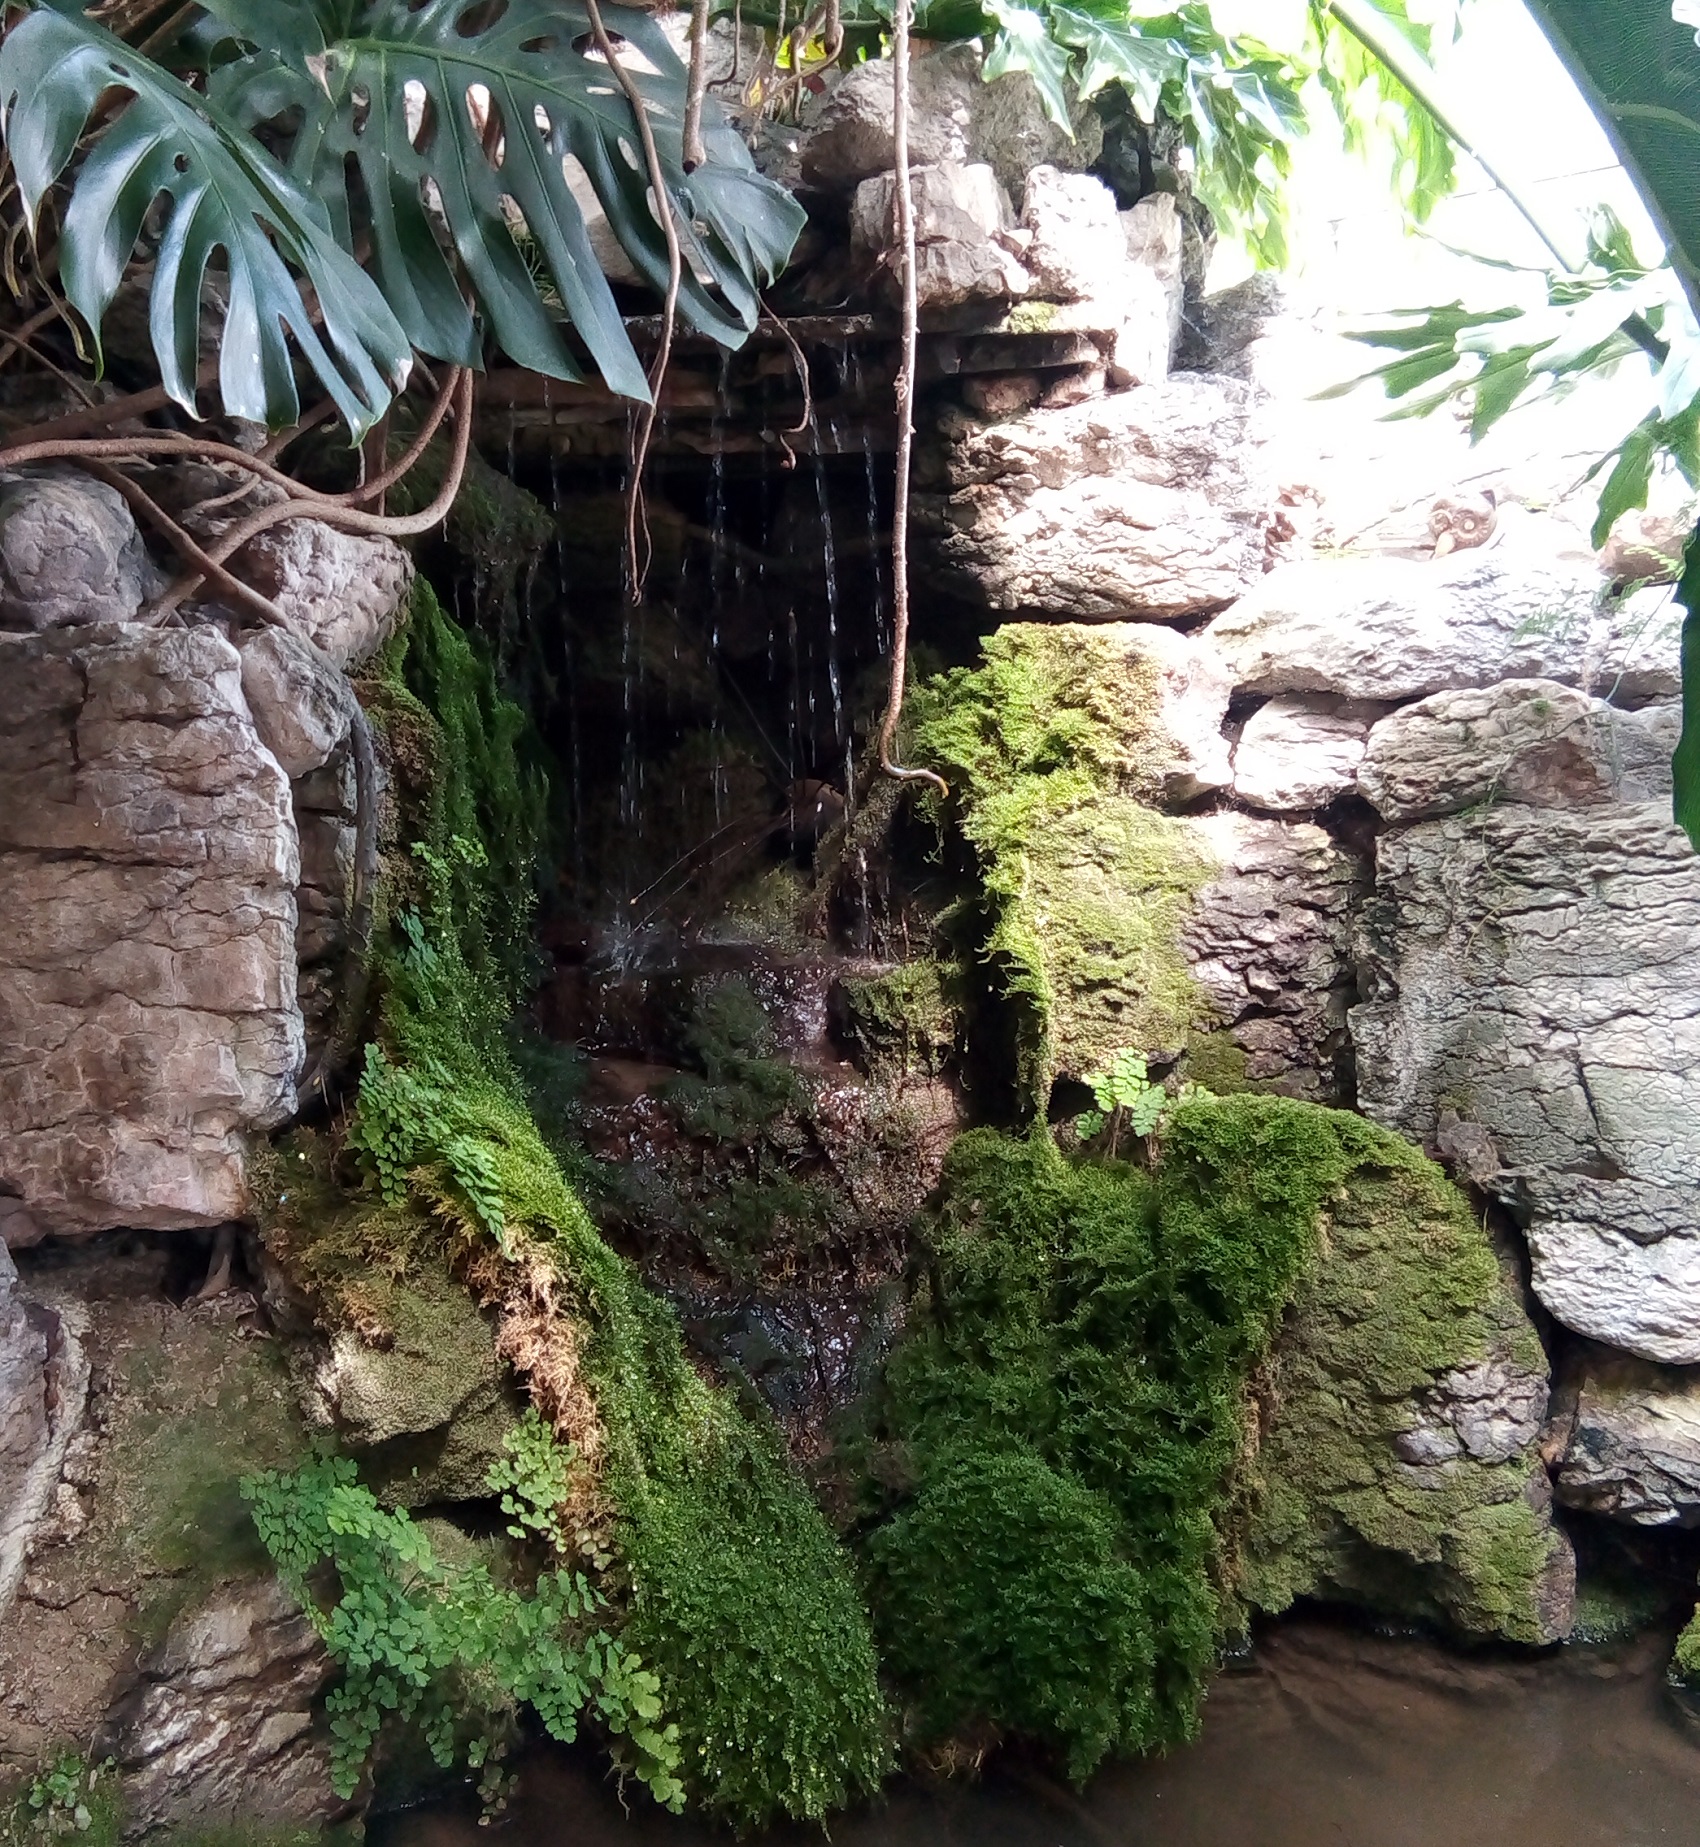 A small waterfall runs down a stone face covered with moss